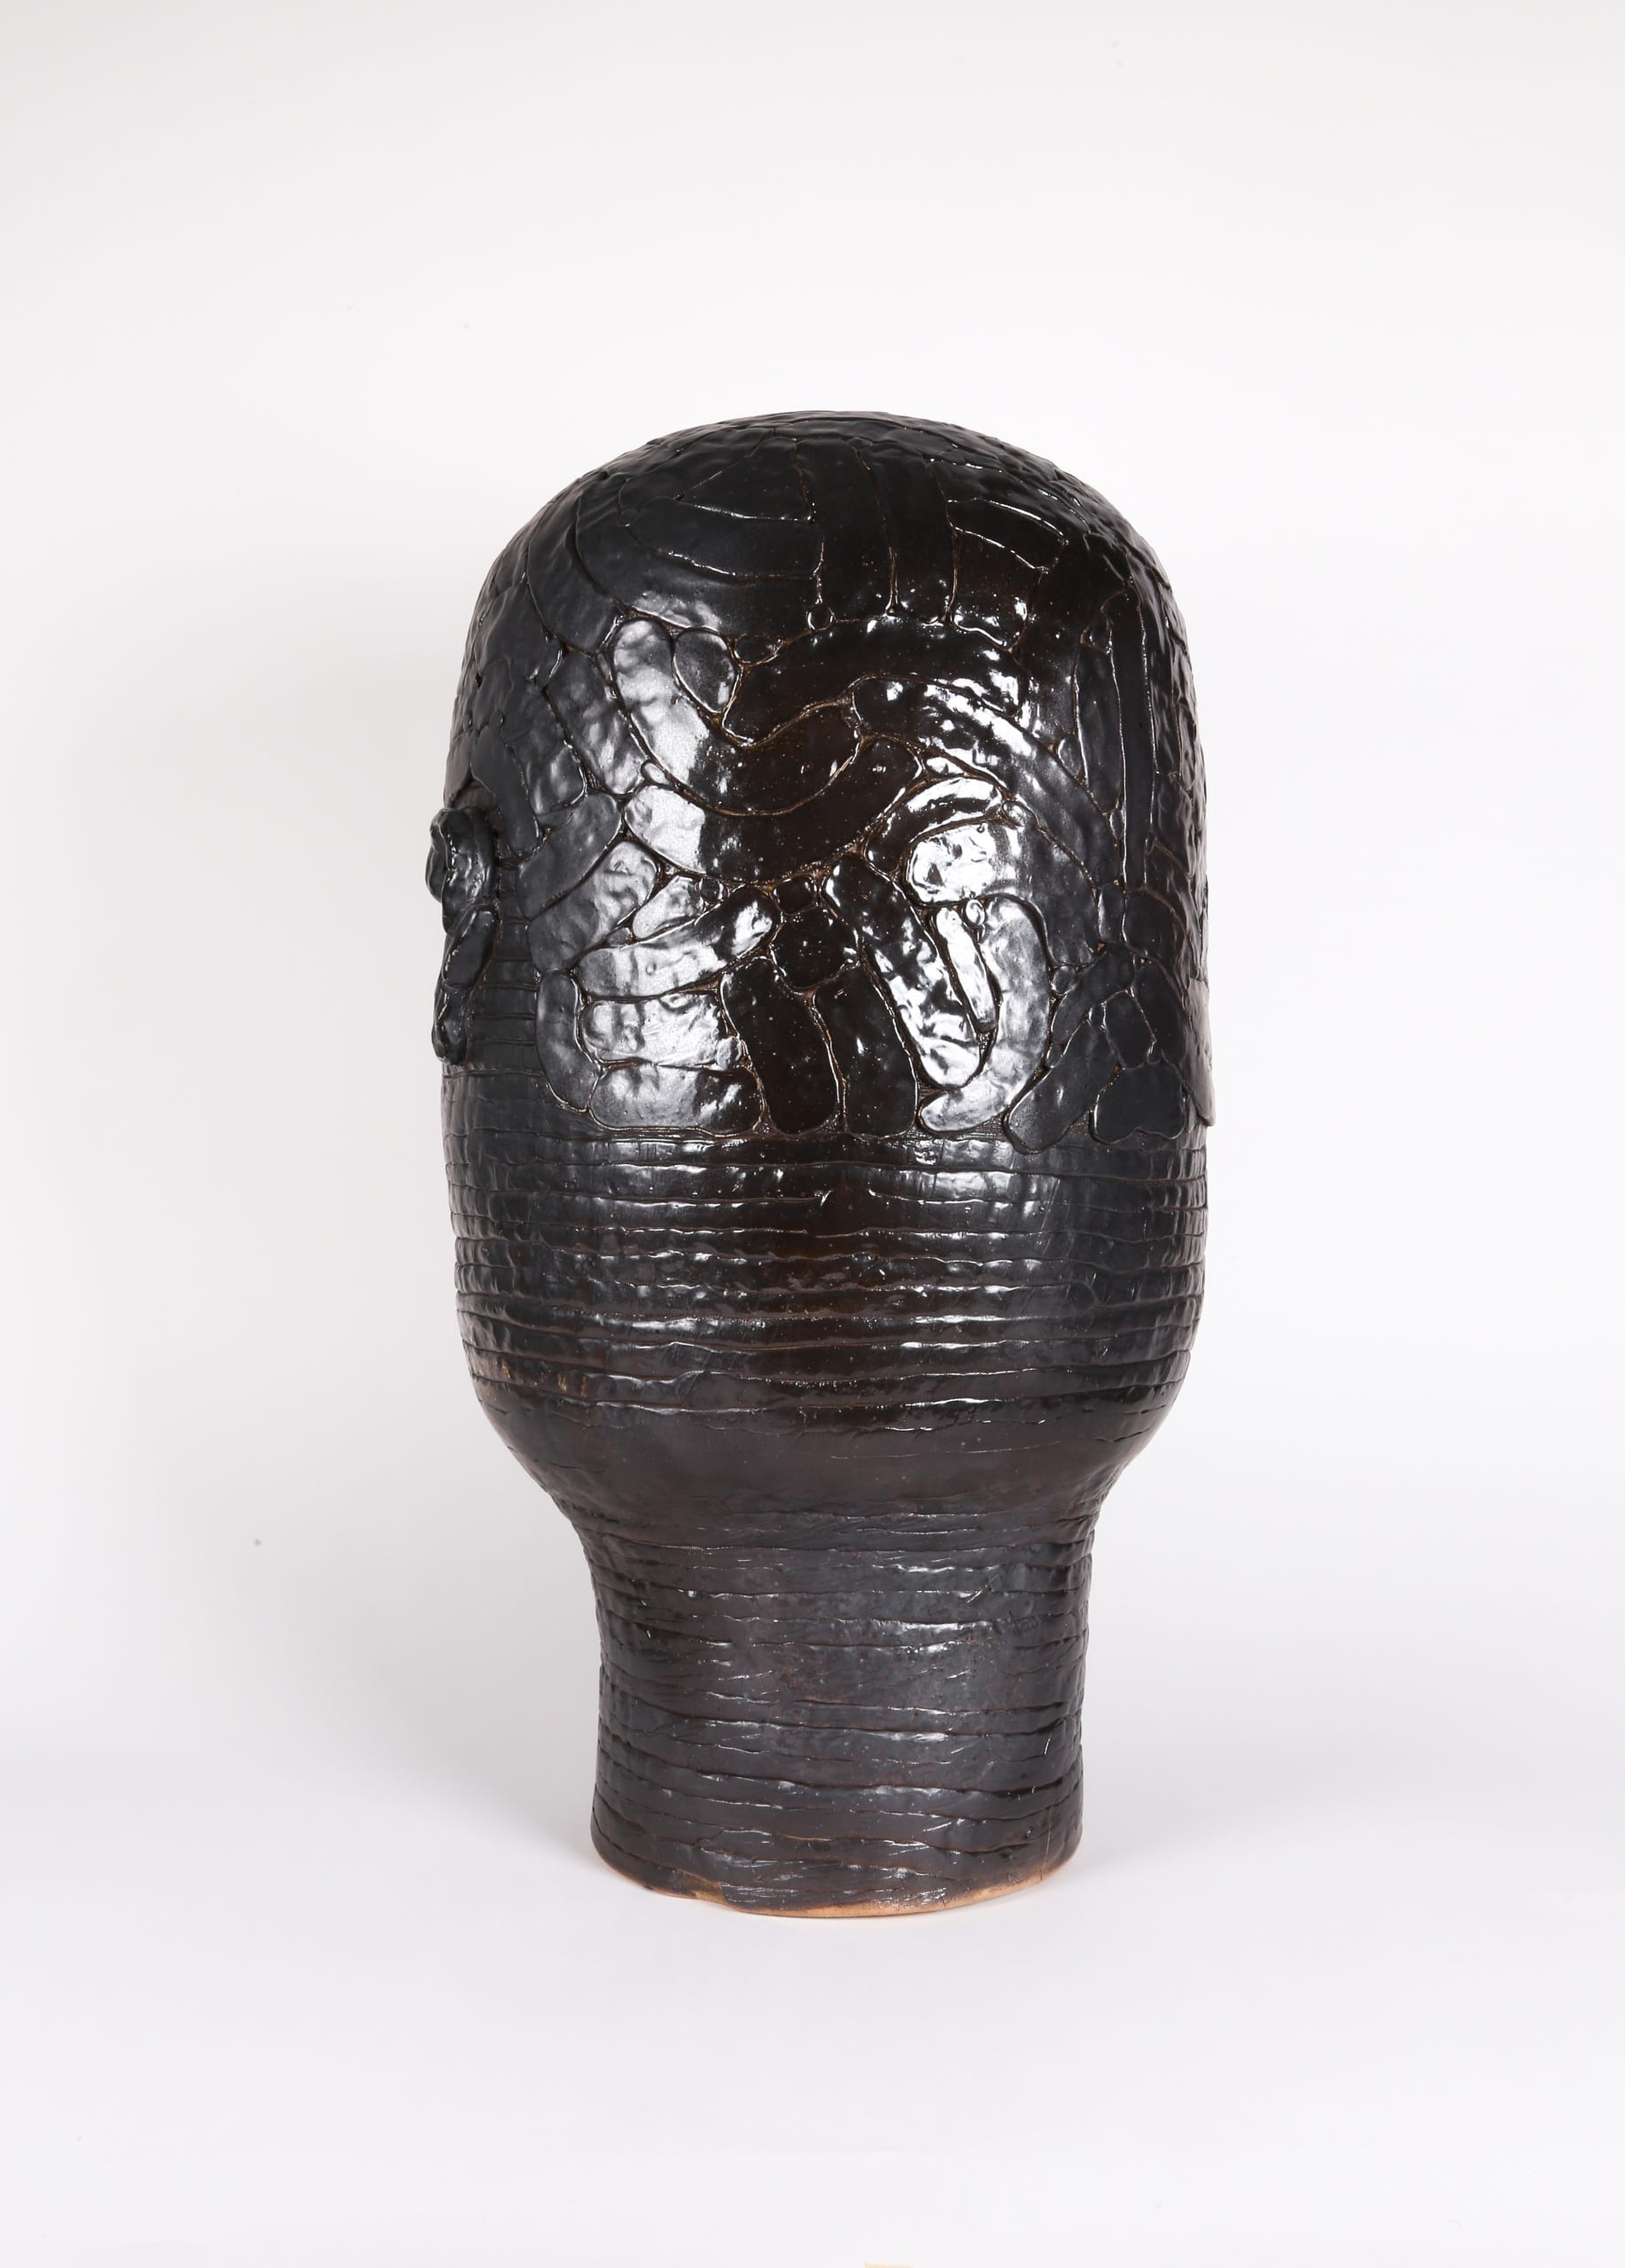 Color photograph with a back view of an abstract ceramic portrait head that appears to be made from a long coil of clay. The outline of hair is affixed to its surface. The object is a monochromatic black with a slight sheen to the glaze.